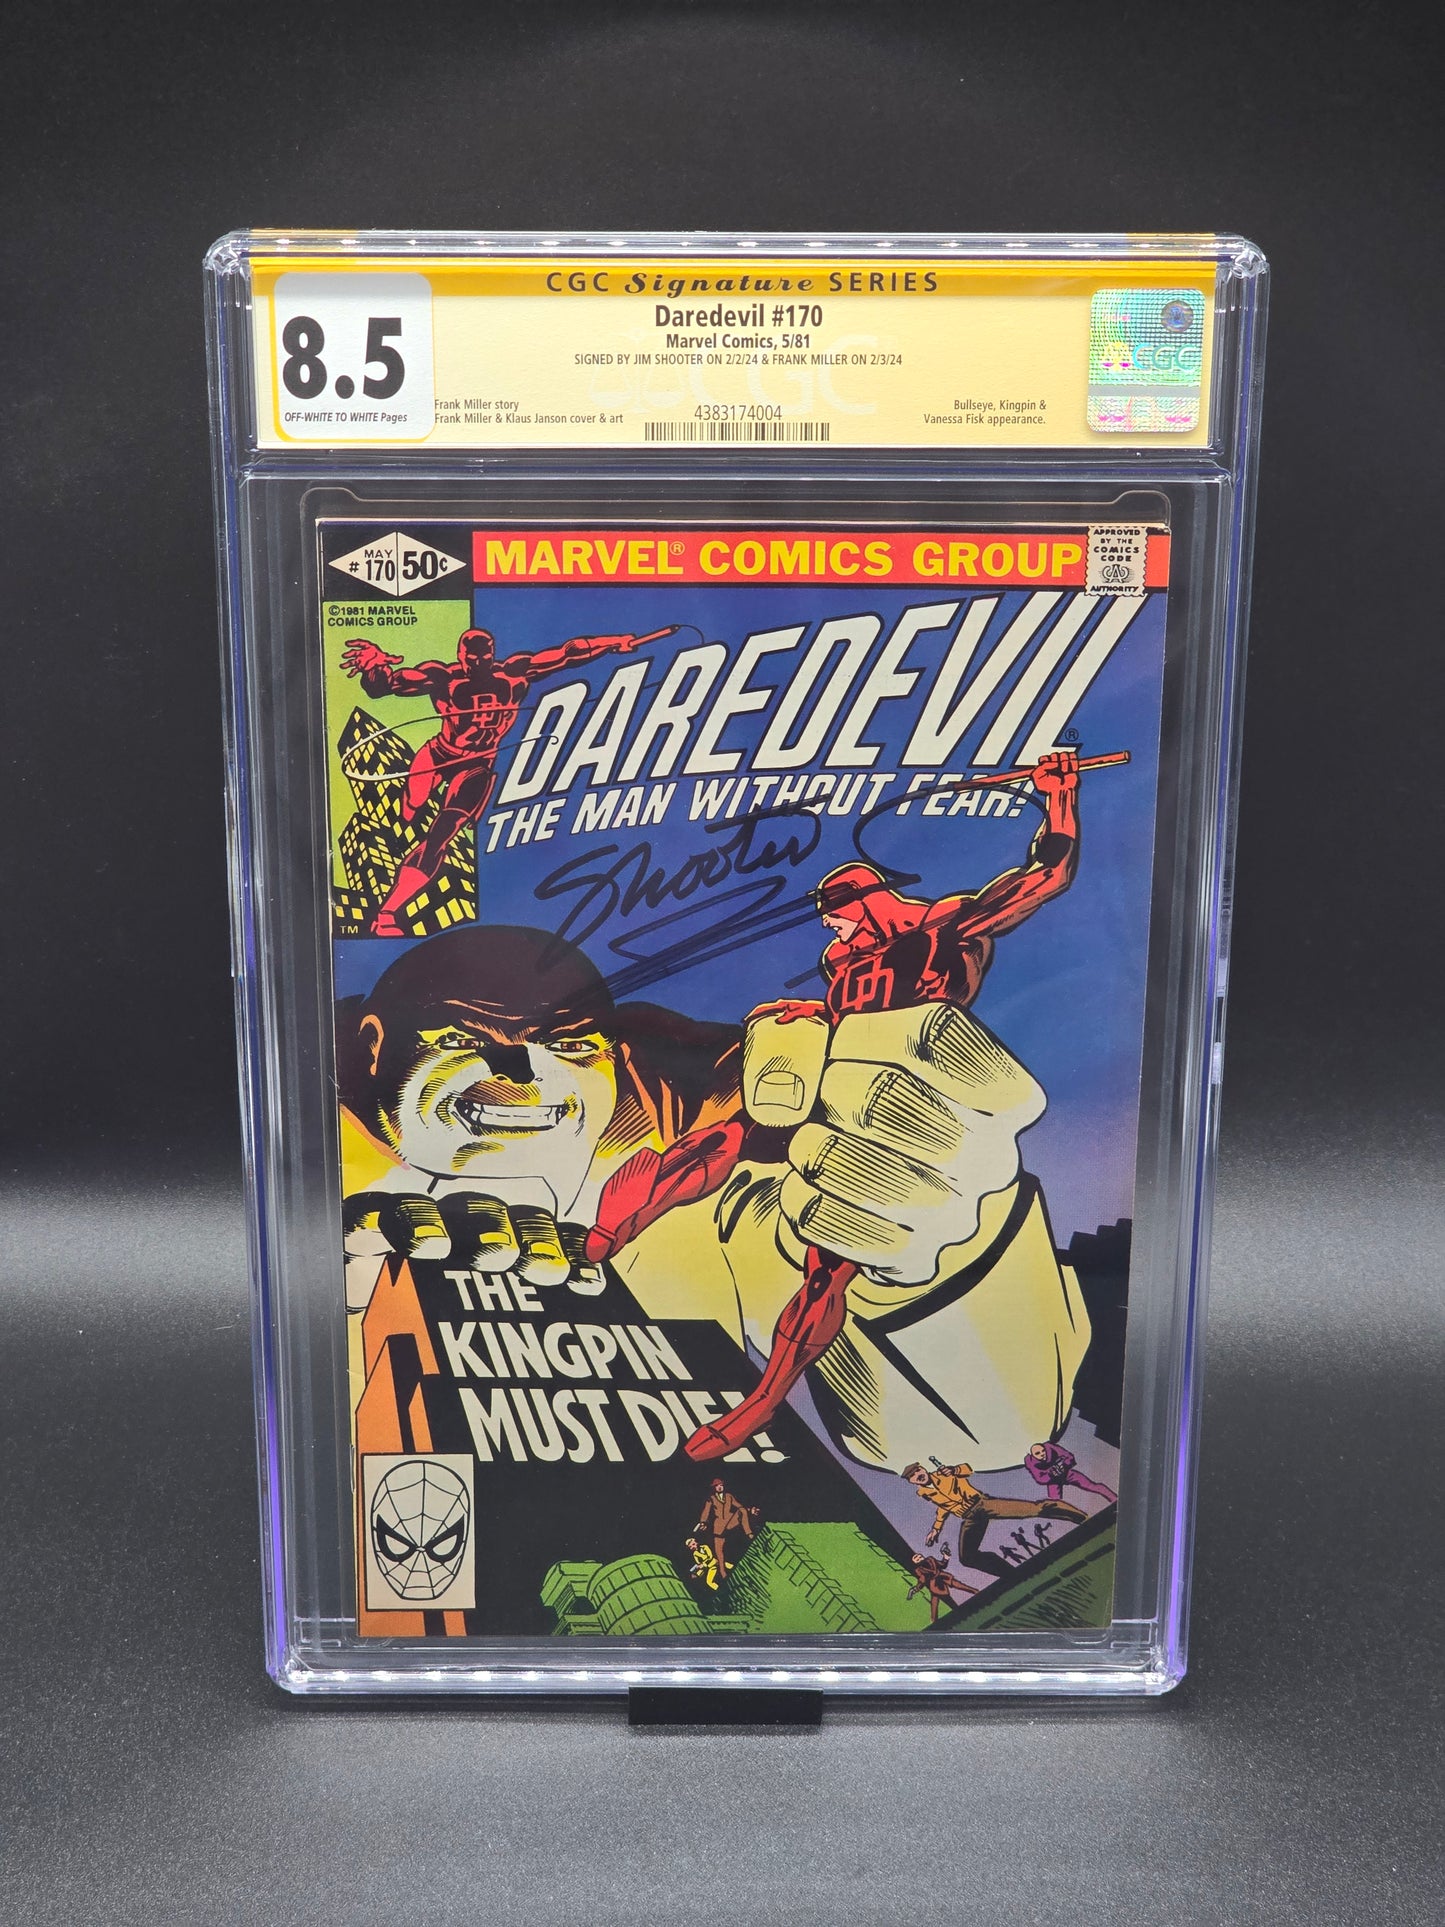 Daredevil #170 5/81 CGC SS 8.5 signed by Frank Miller and Jim Shooter